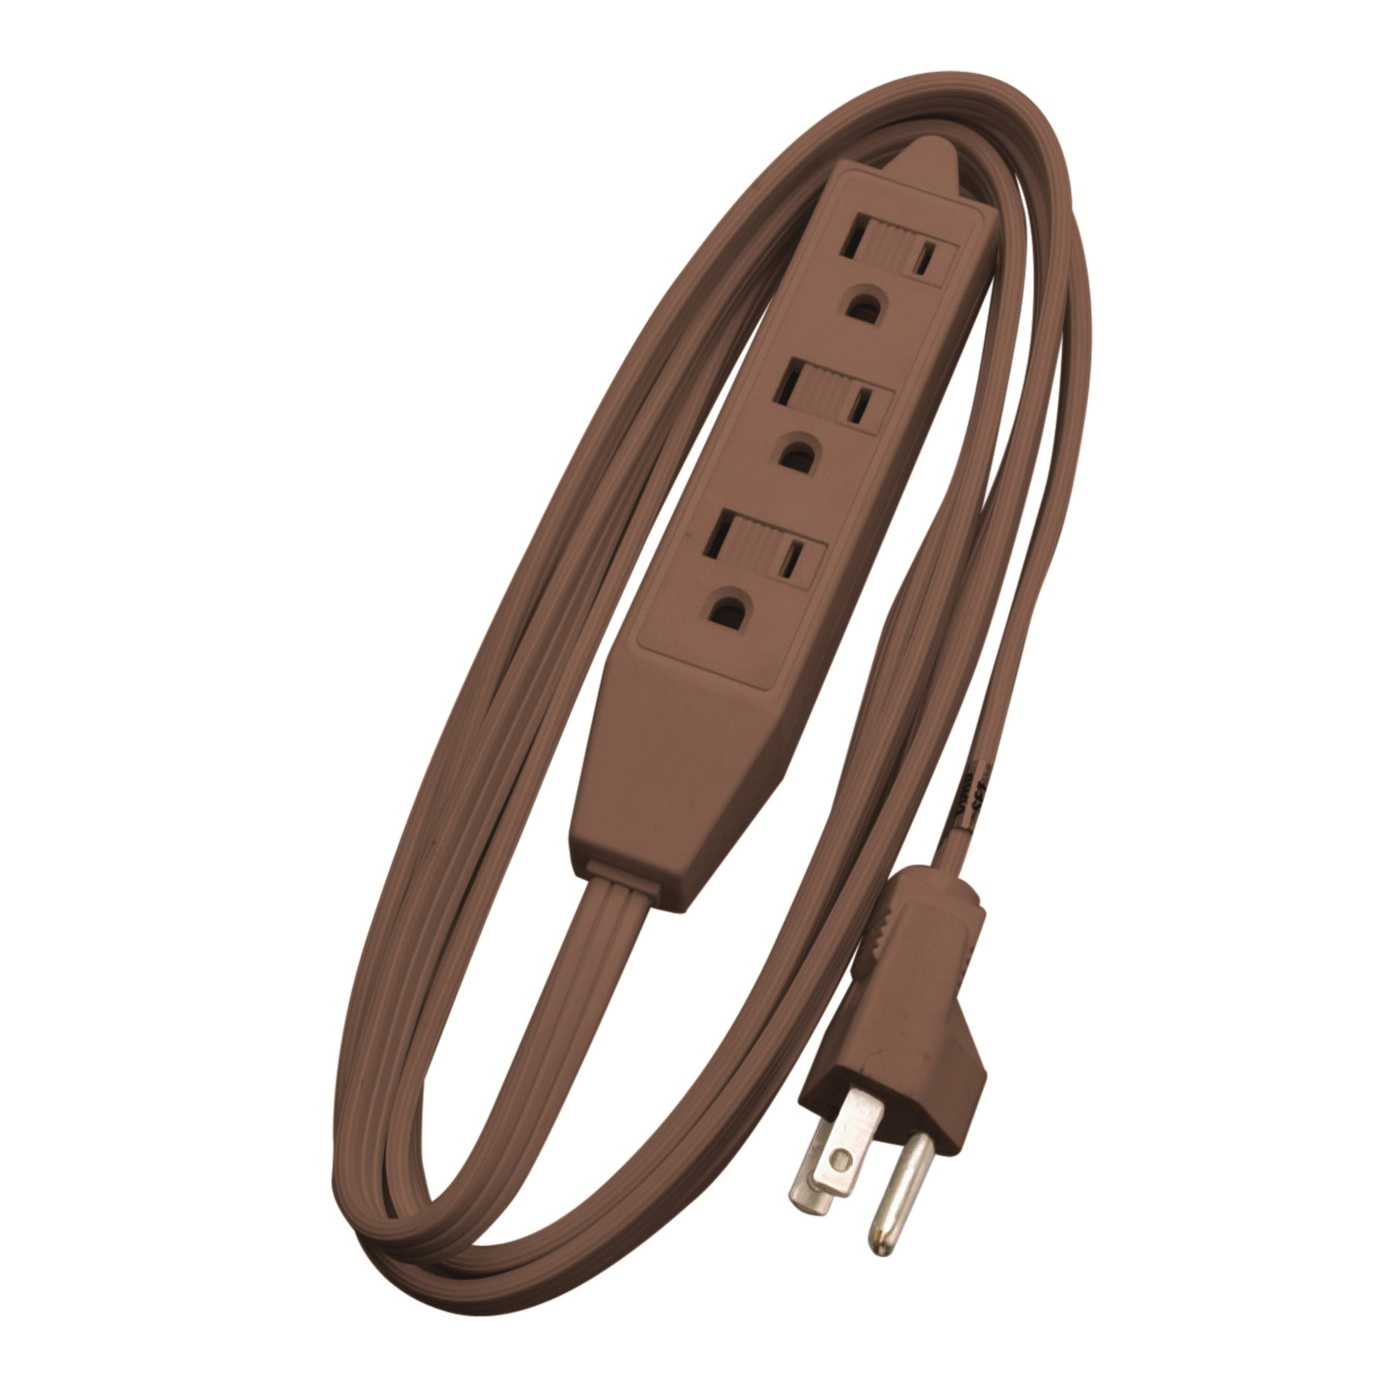 CCI 0608 Extension Cord, 16 AWG Cable, 8 ft L, 13 A, 125 V, Brown - 1